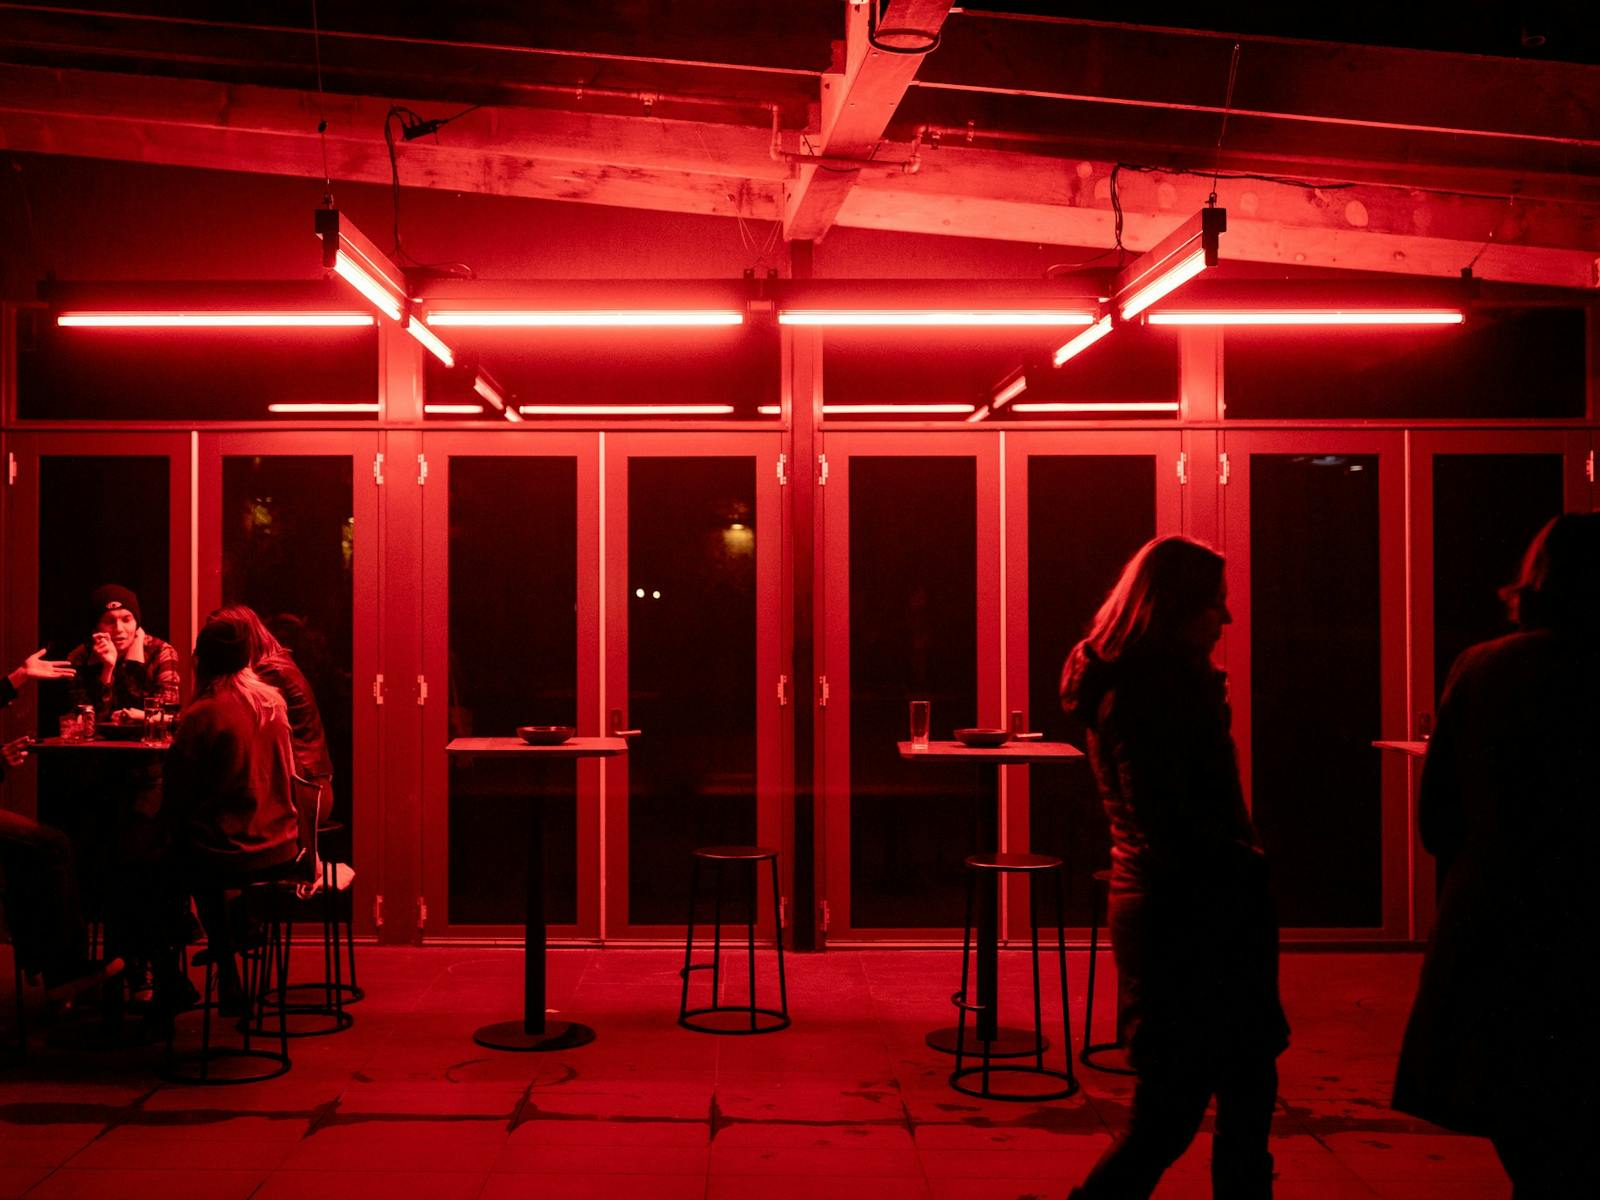 Red neon lights illuminate the upstairs courtyard, with people seating and two tall bar tables